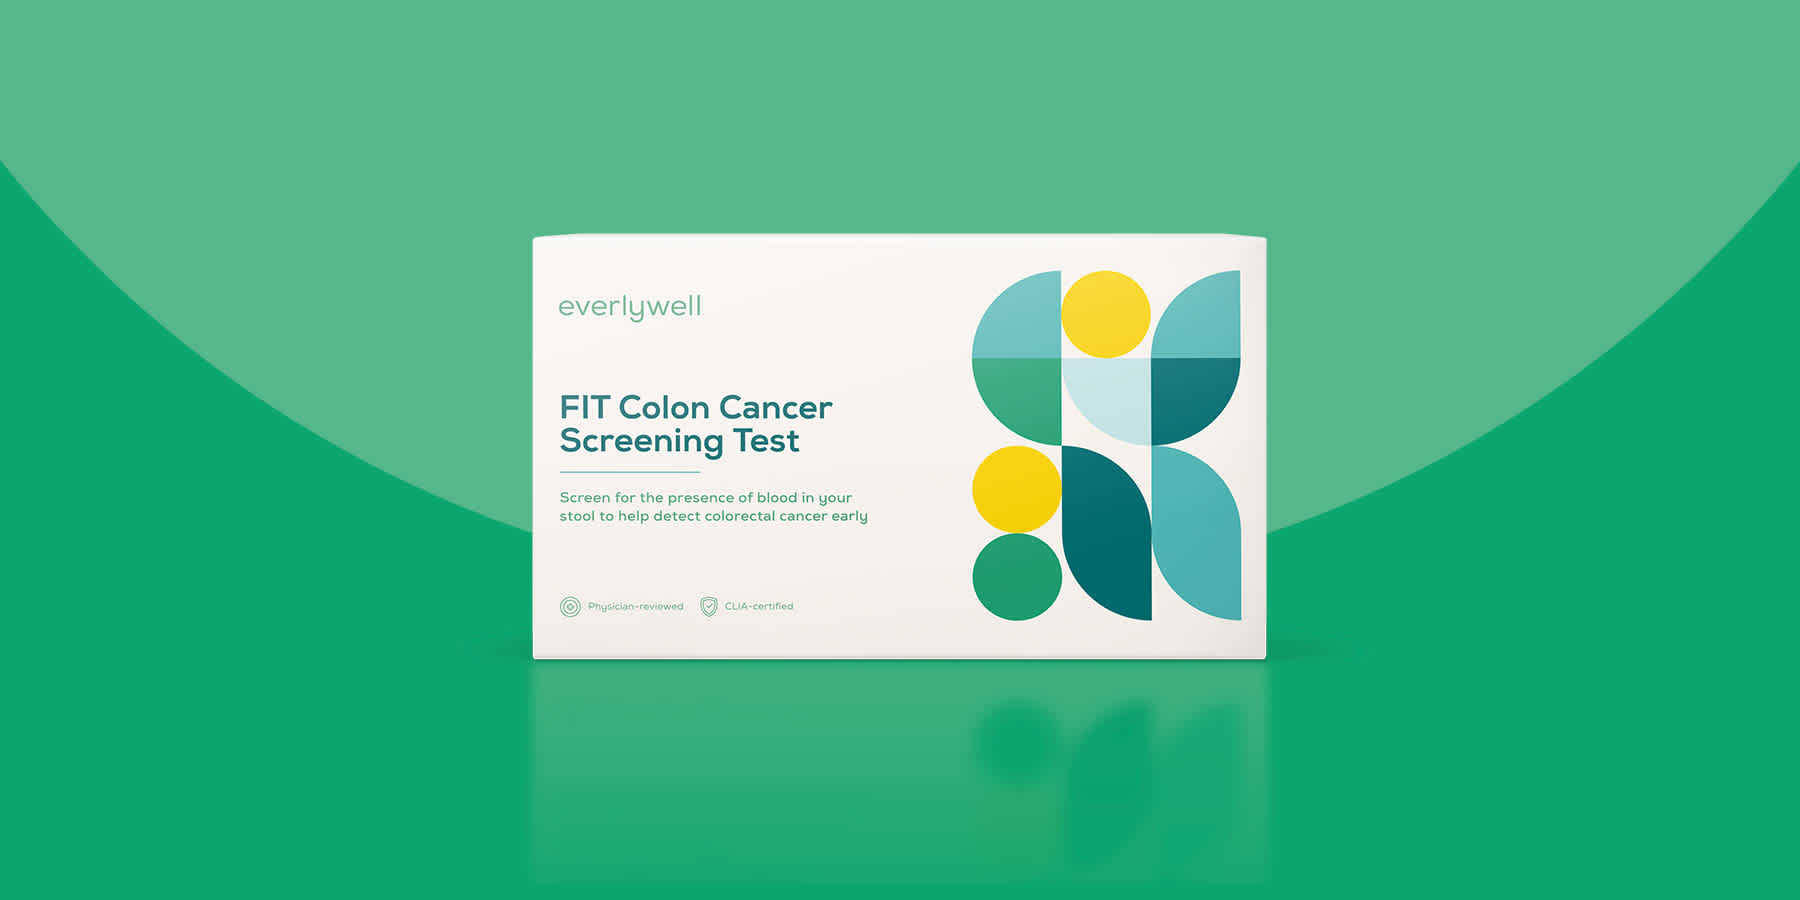 Image of kit box for the Everlywell FIT Colon Cancer Screening Test against a green background